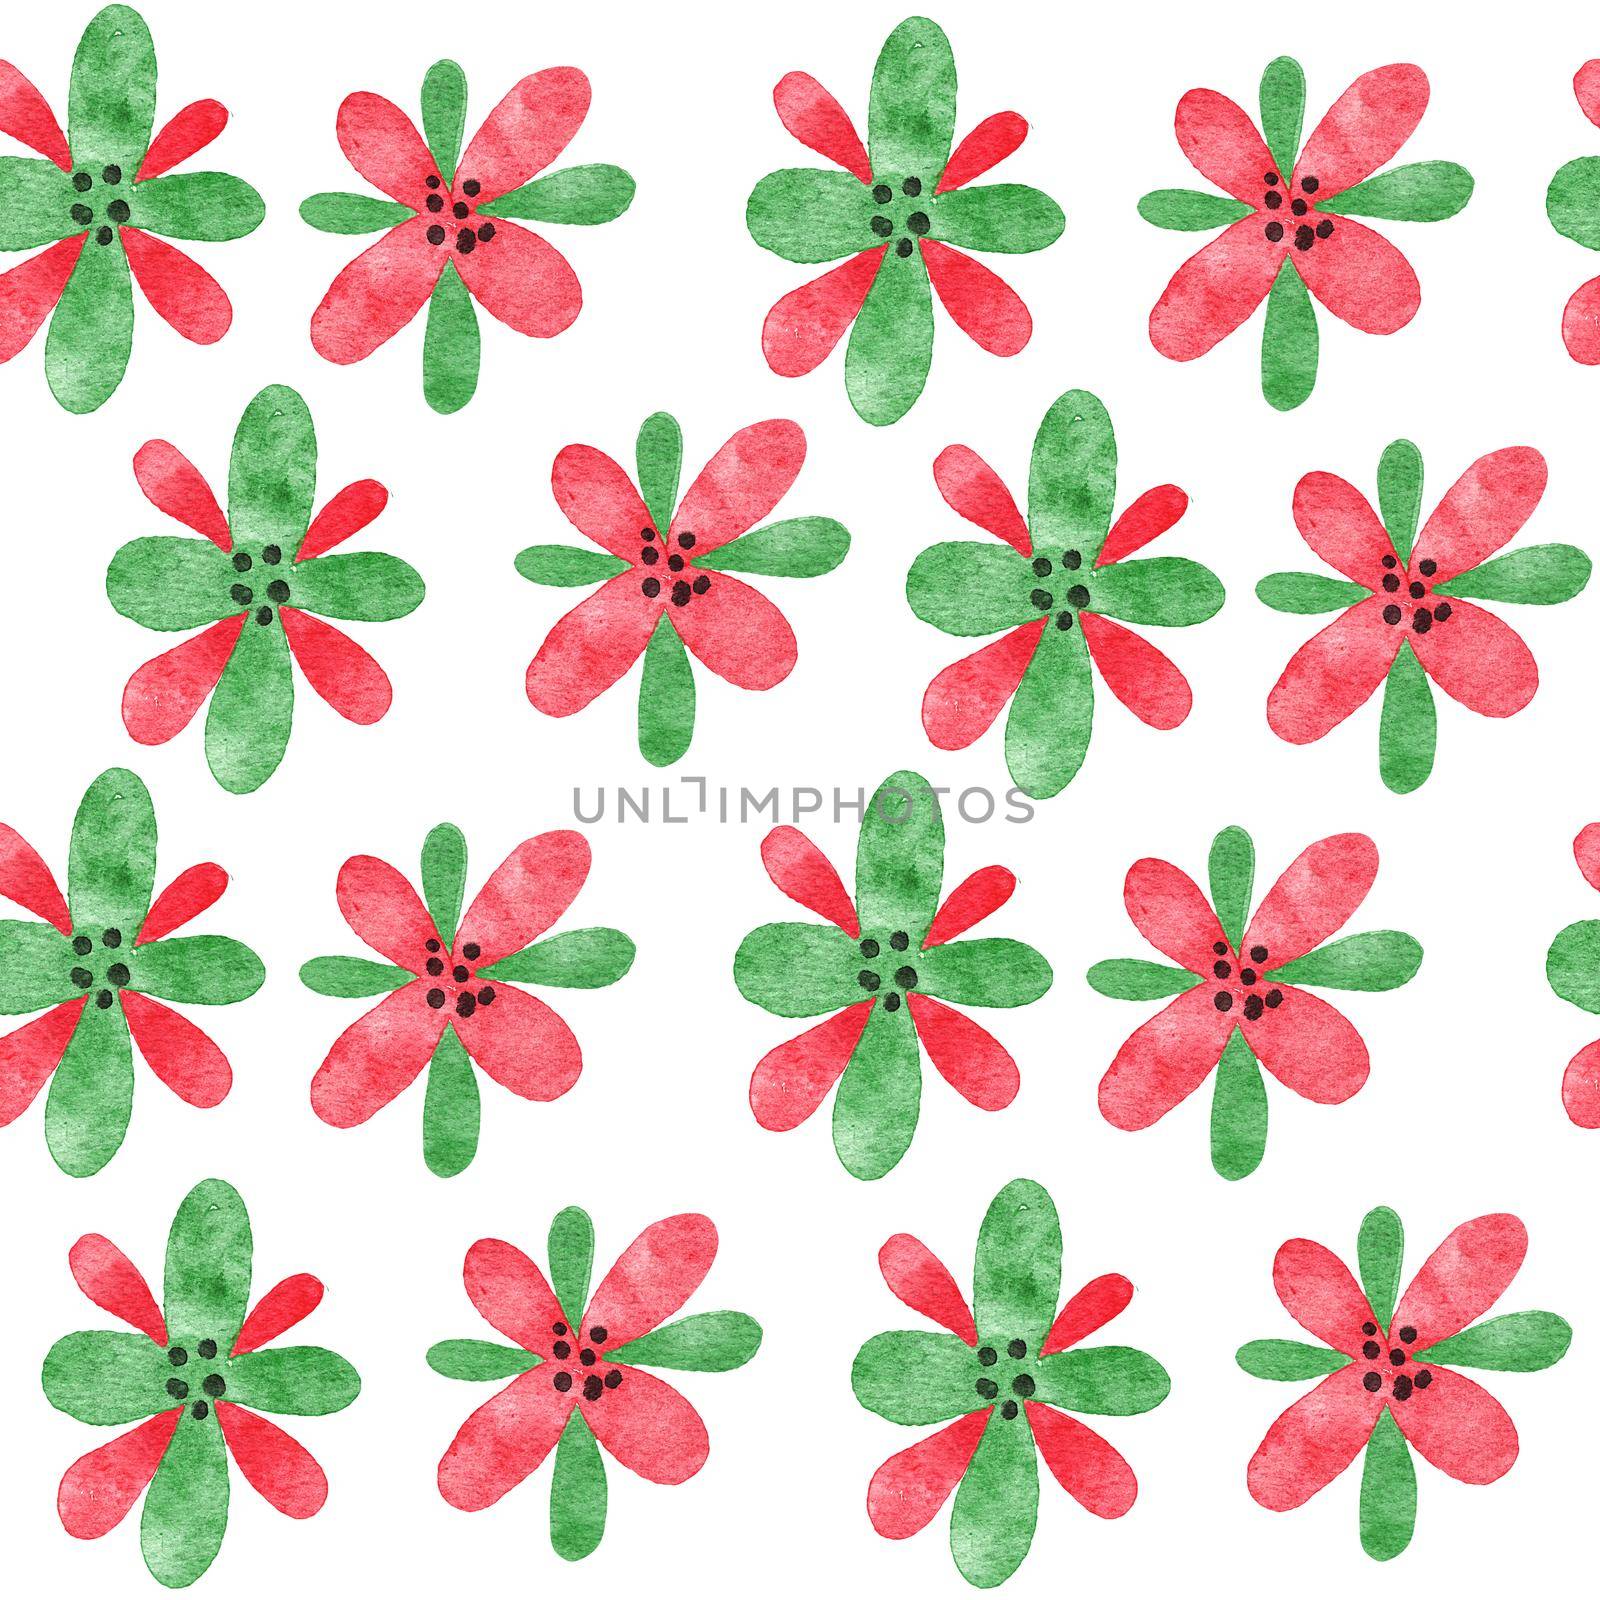 Watercolor seamless hand drawn pattern with red green abstract shapes elements flowers, bright summer background. Minimalist modern fabric print design for textile wallpaper wrapping paper, simple organic forms. by Lagmar